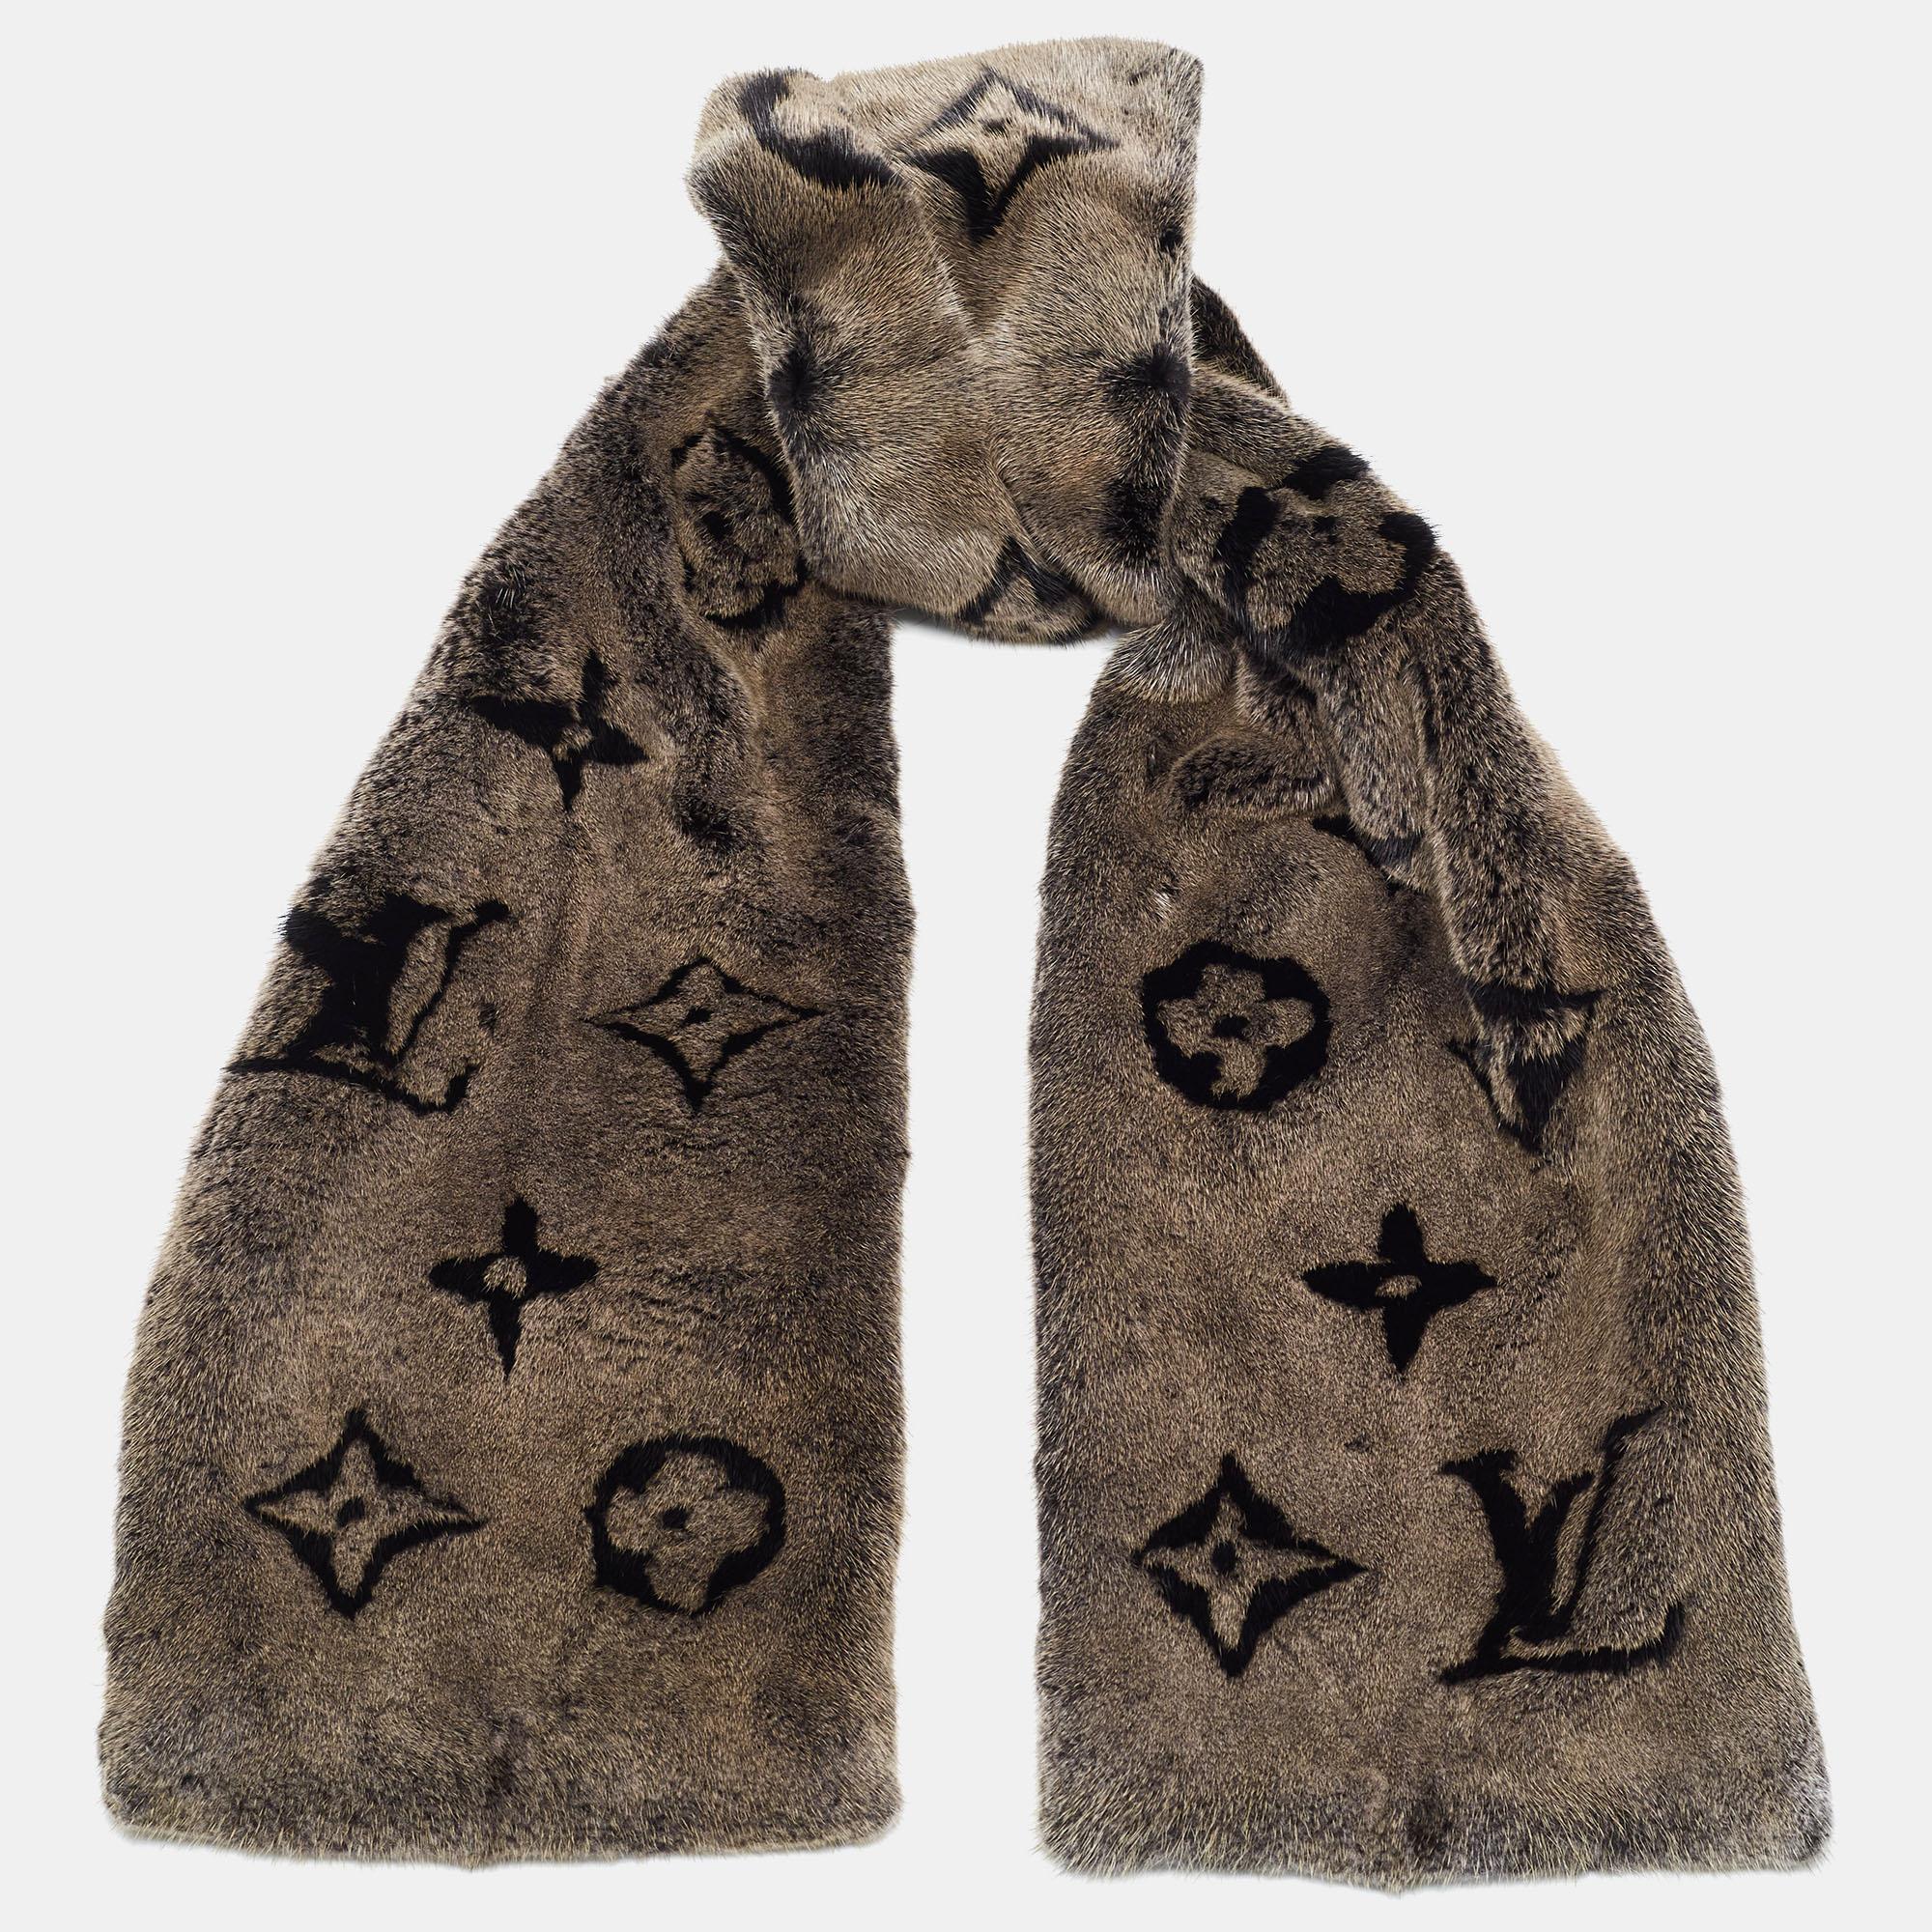 The perfect style companion on a cold day comes to you in the form of this Louis Vuitton scarf. The mink fur piece comes detailed with the brand's Monogram all over.

